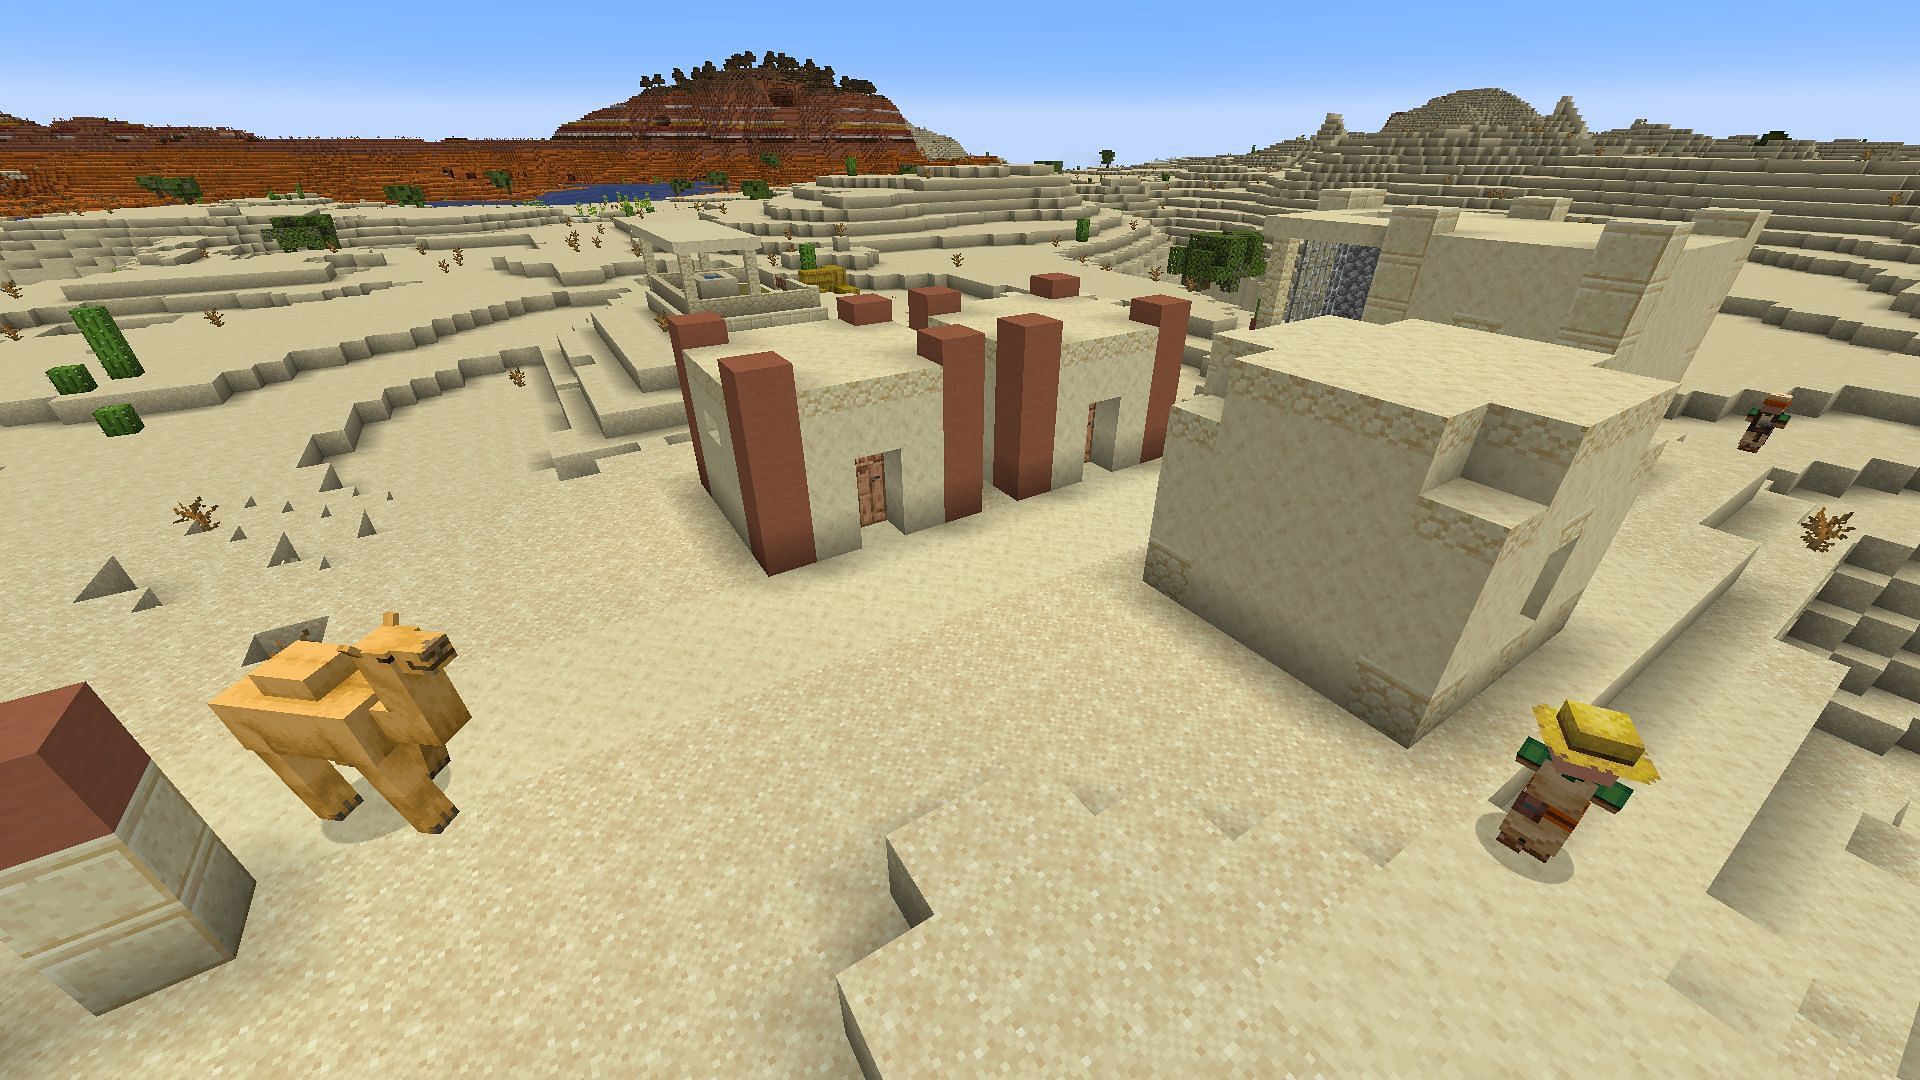 Minecraft desert seeds still have plenty of benefits to offer players who use them (Image via Mojang)